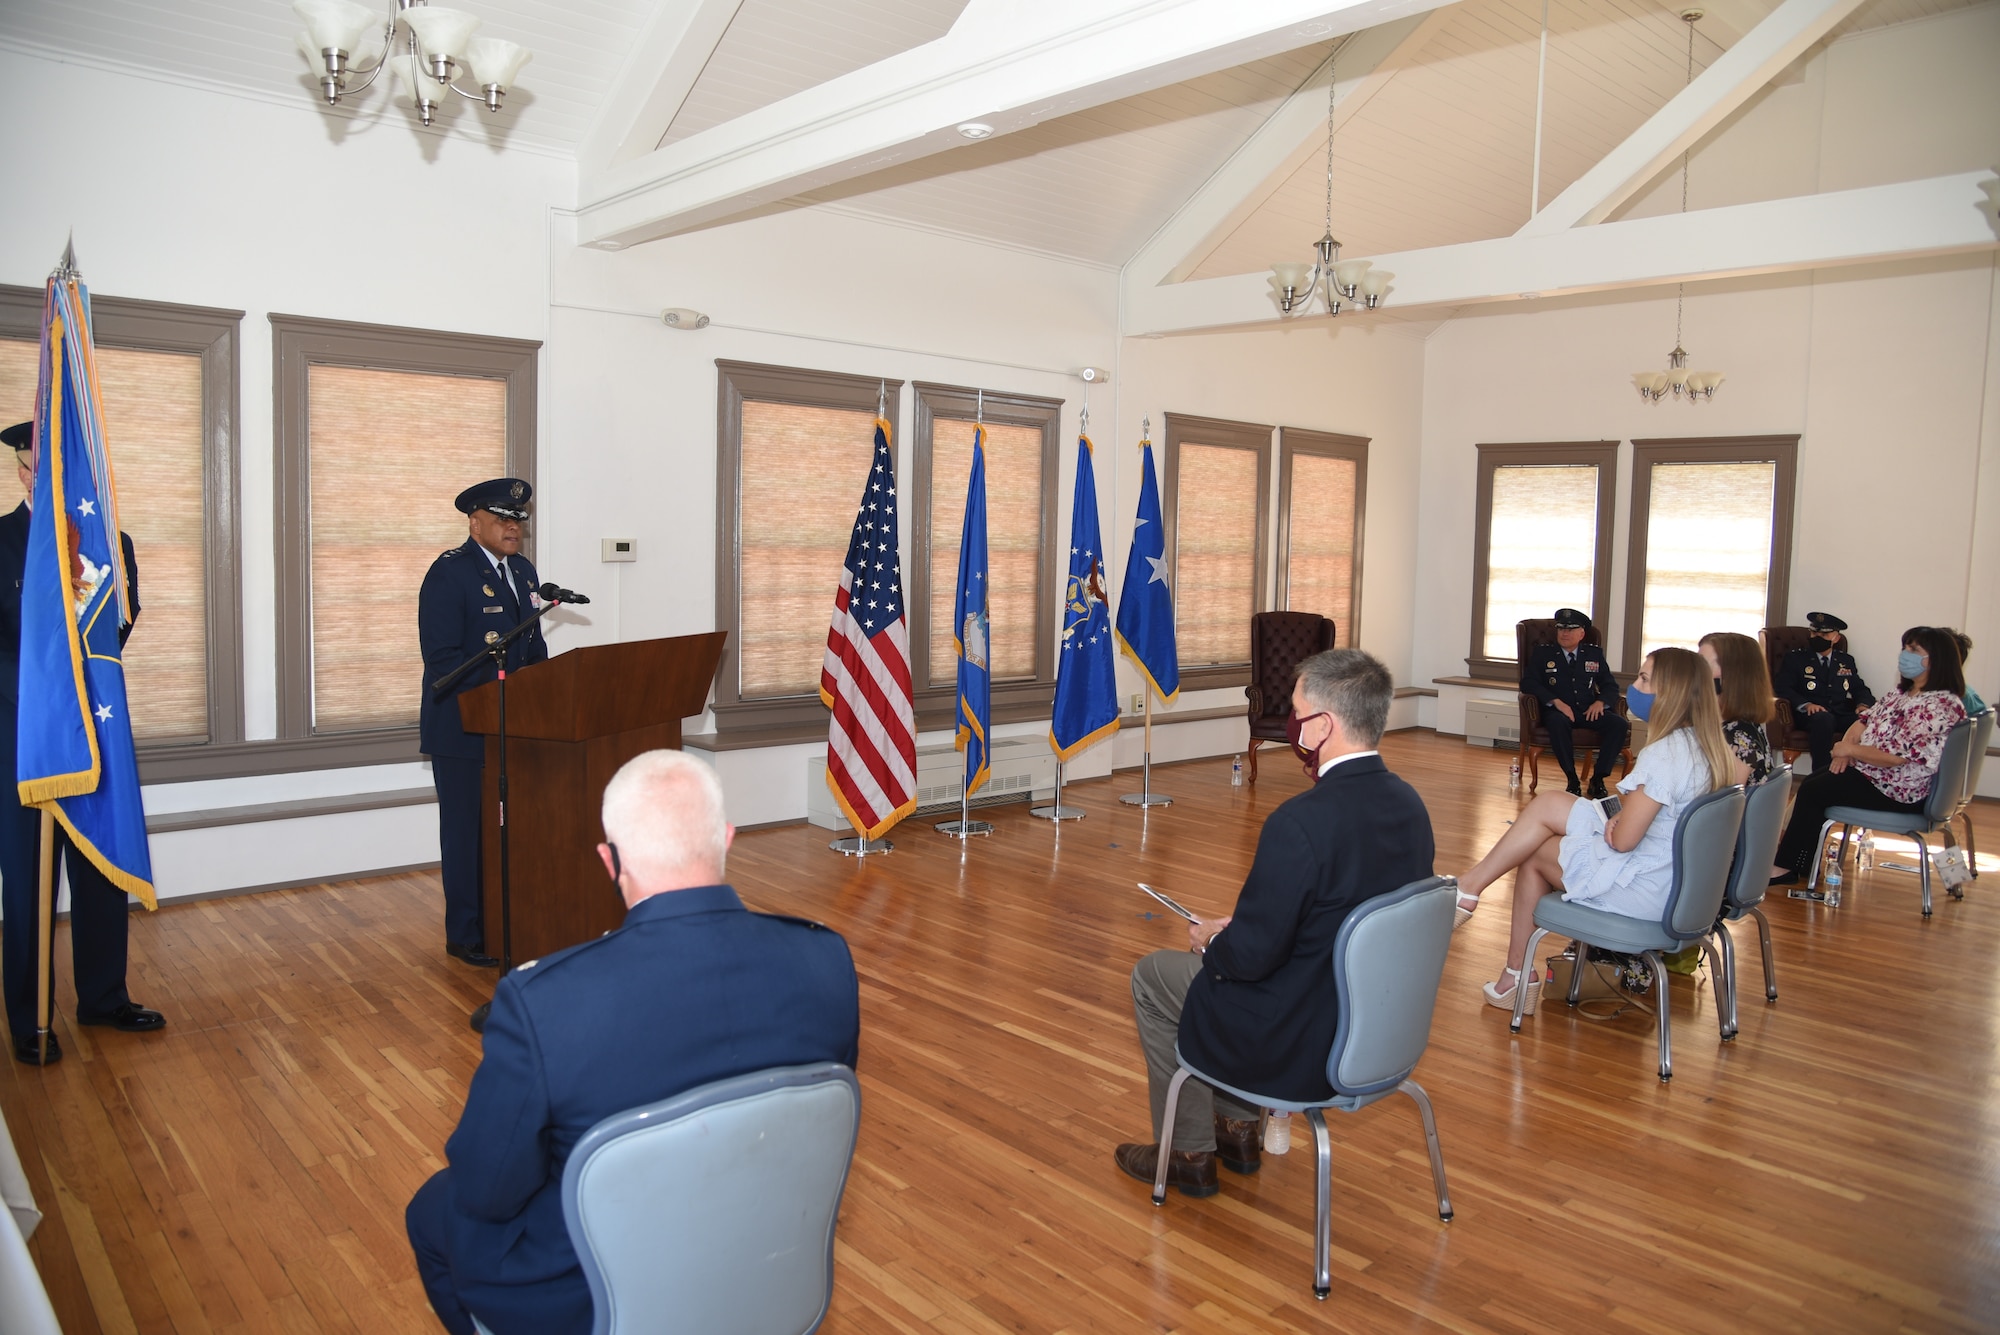 Lt. Gen. Anthony Cotton, deputy commander of Air Force Global Strike Command, gives remarks during the 20th Air Force change of command ceremony, 8 July, 2020, F. E. Warren Air Force Base, Wyo. During the ceremony, Maj. Gen. Michael J. Lutton took command of 20th Air Force from Maj. Gen. Ferdinand “Fred” B. Stoss. (U. S. Air Force photo by Glenn S. Robertson)